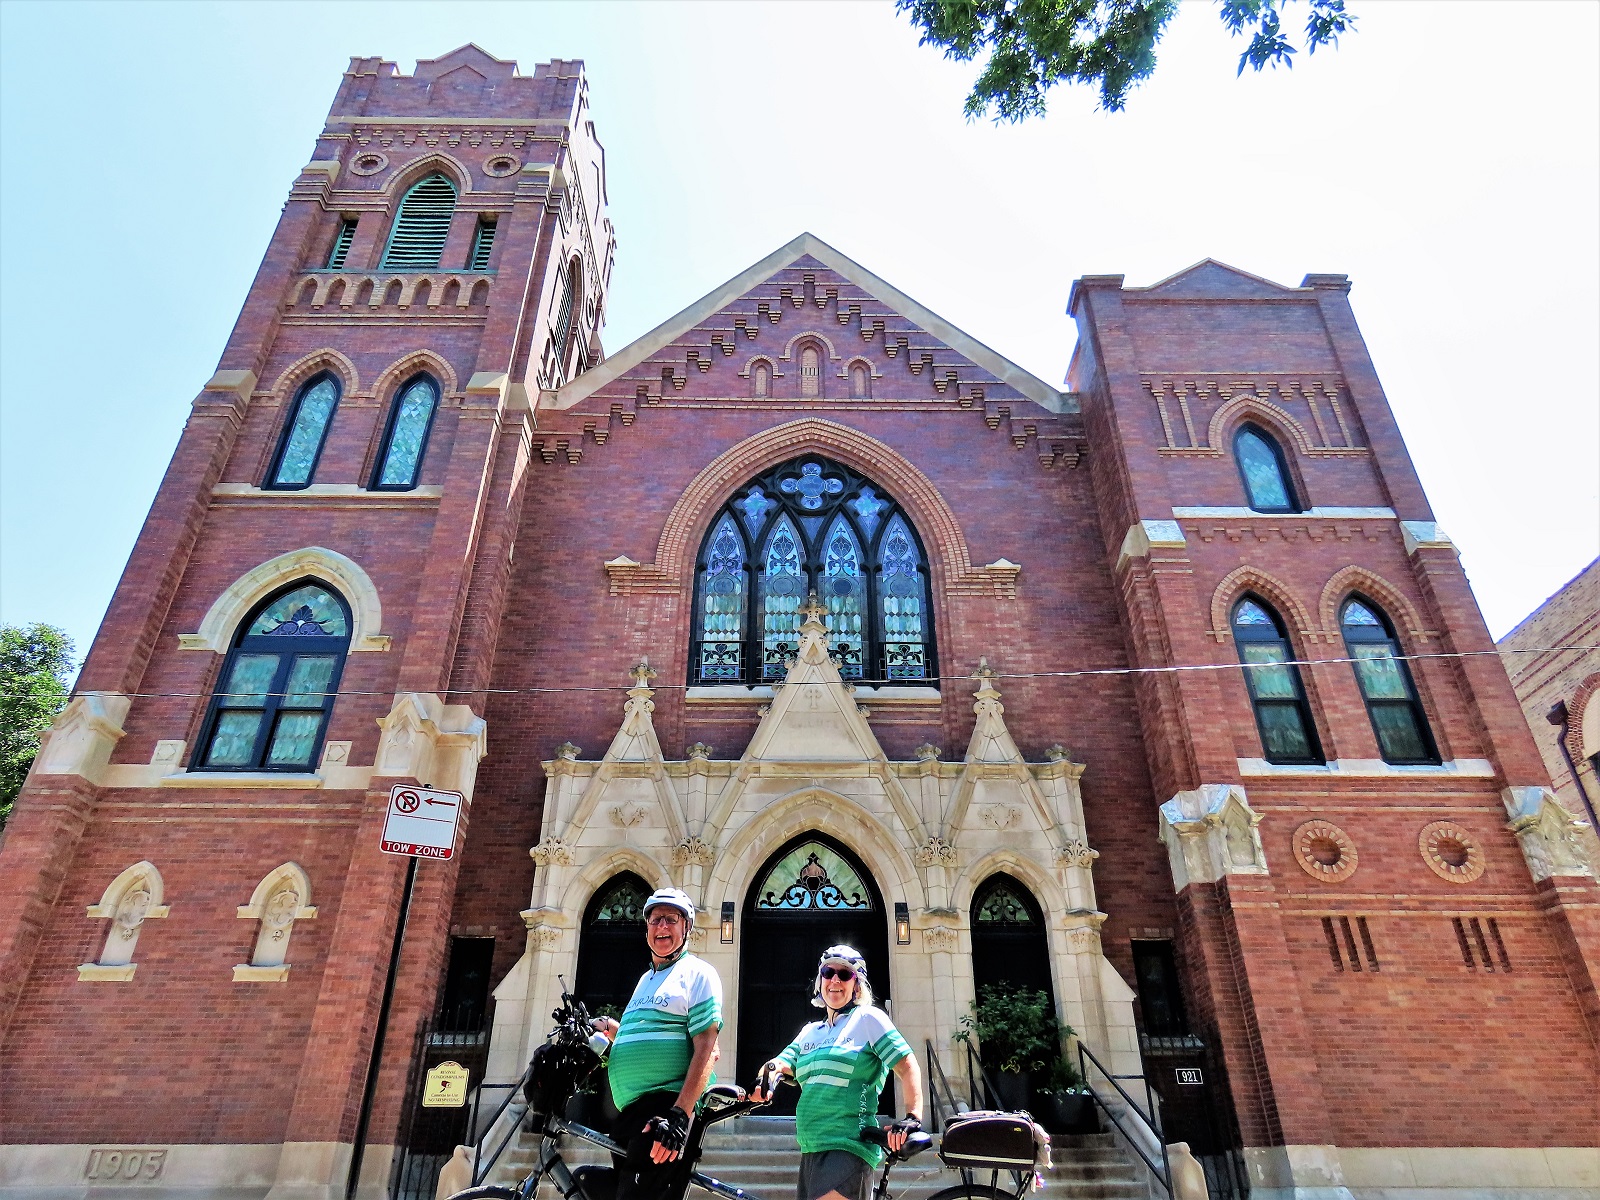 Two CBA friders on a tandem bike smiling at the camera in front of a brown brick Gothic Revival church with limestone entry.